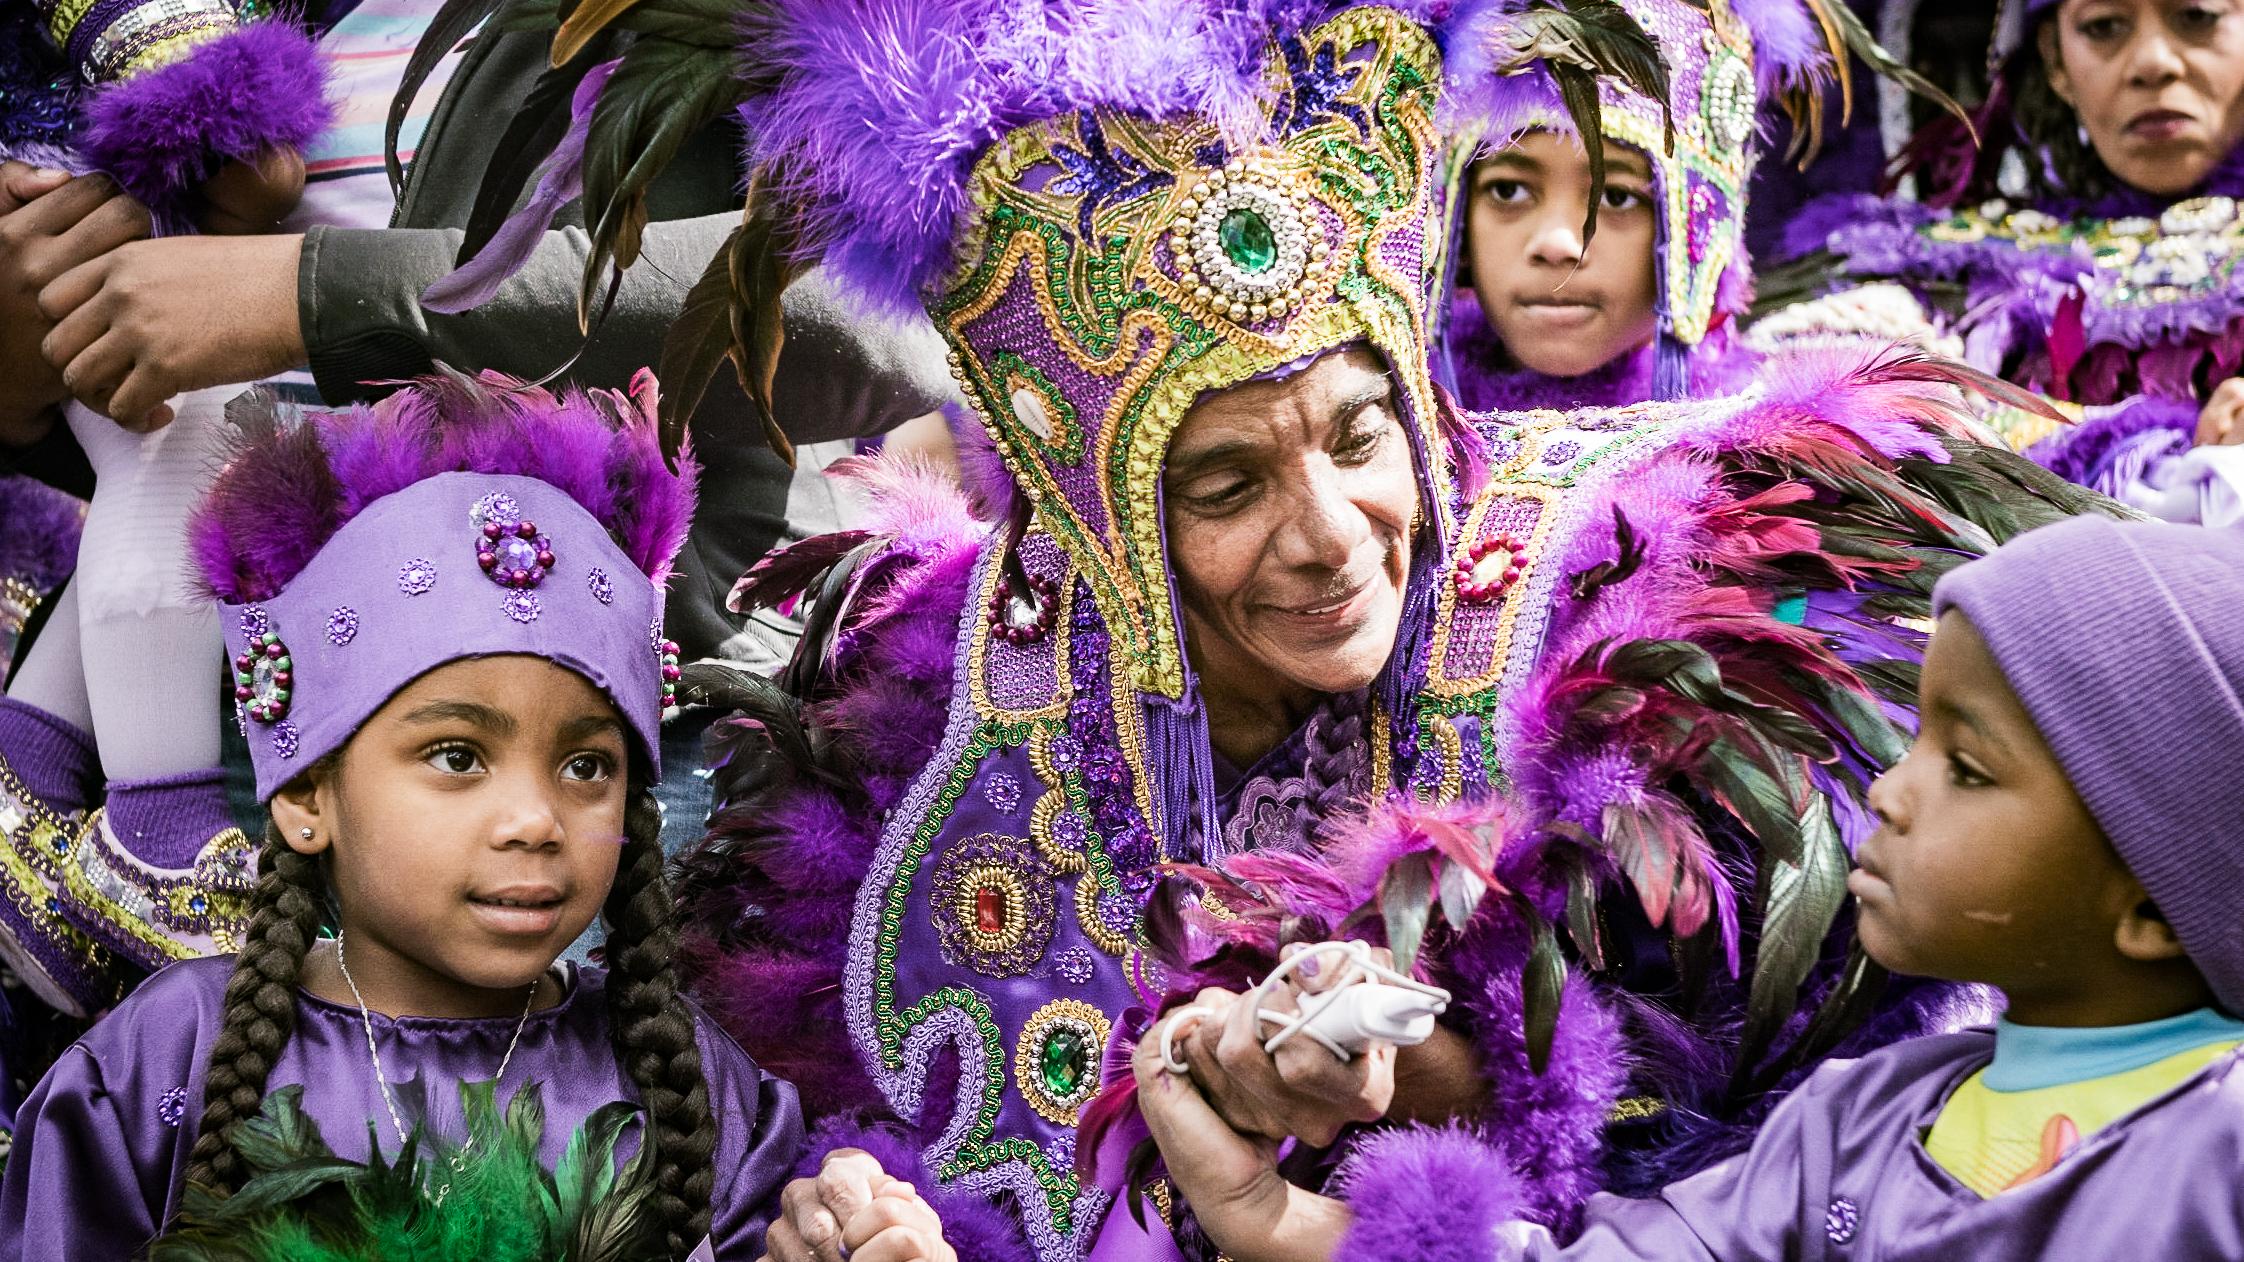 A person dressed in a beaded and feathered costume surrounded by children in similar costume.